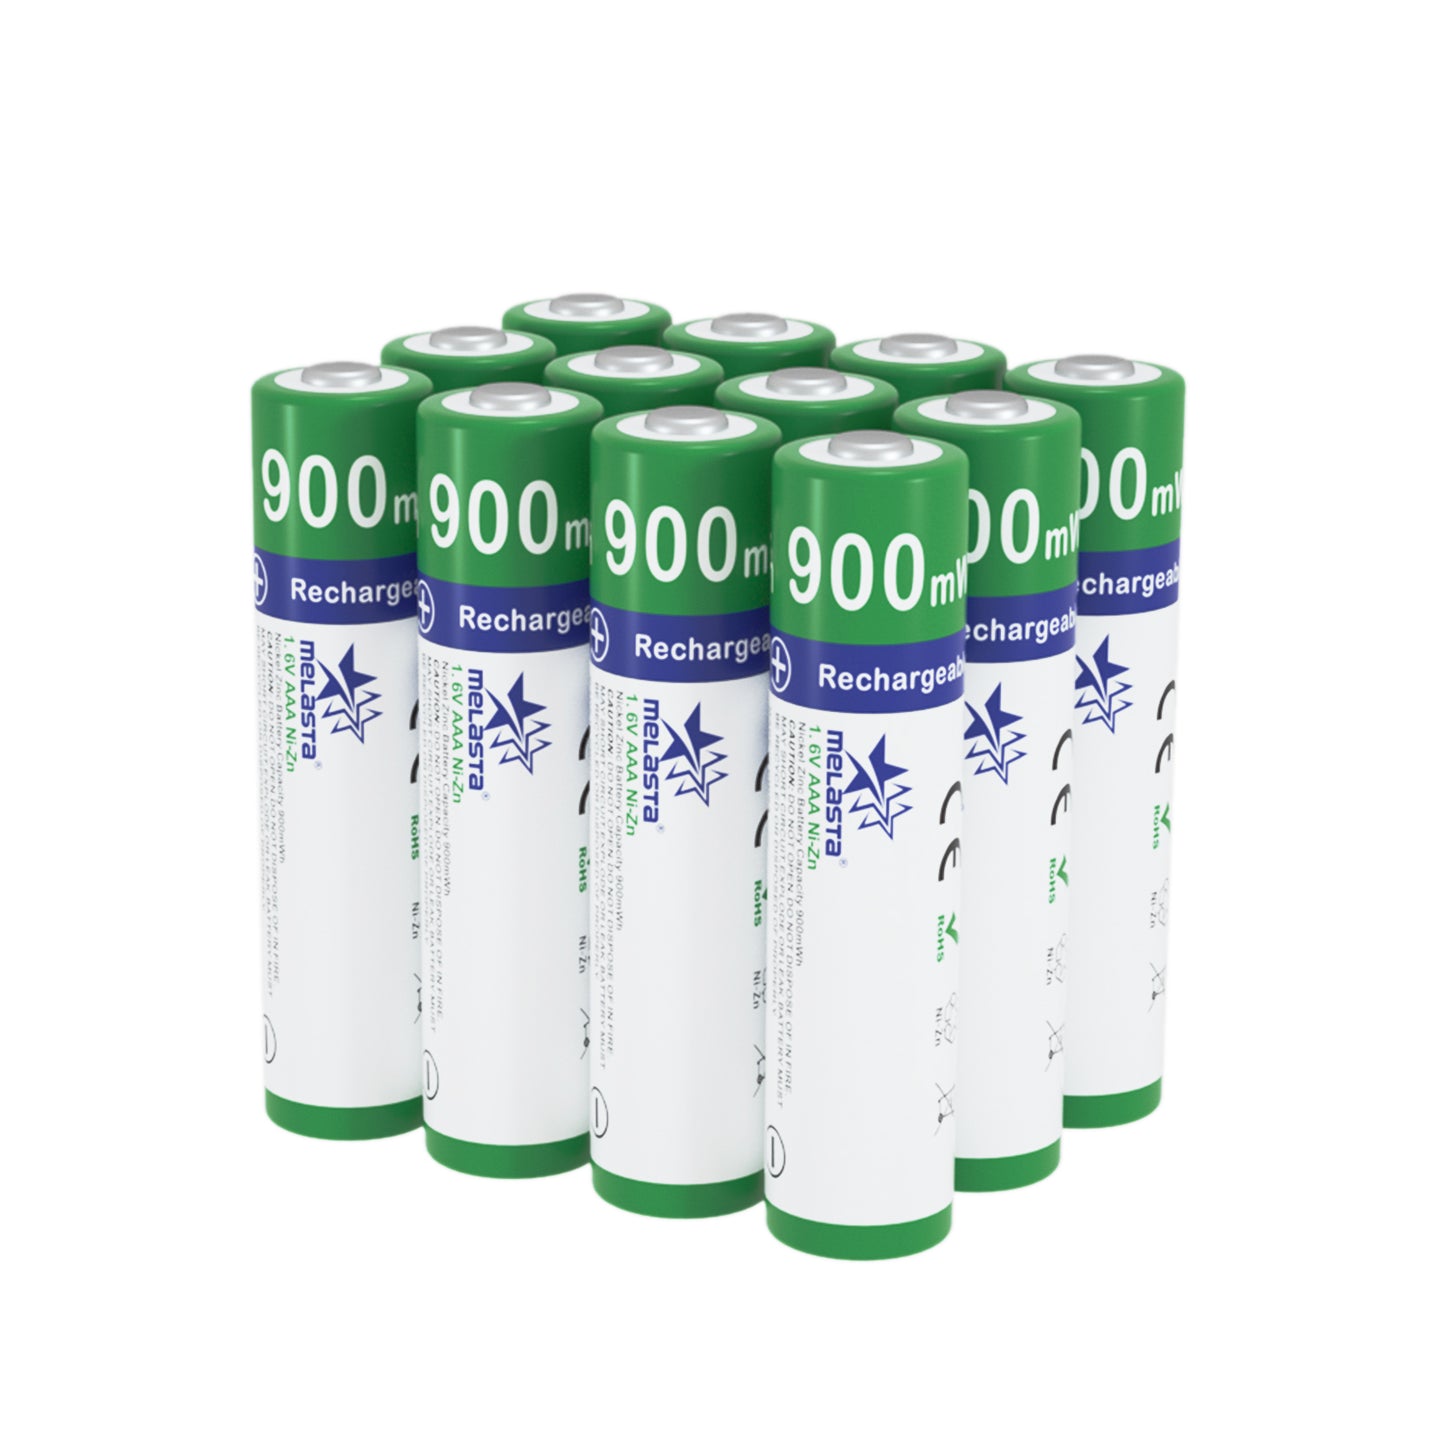 16PCS AAA 900mWh 1.6V Ni-Zn rechargeable battery